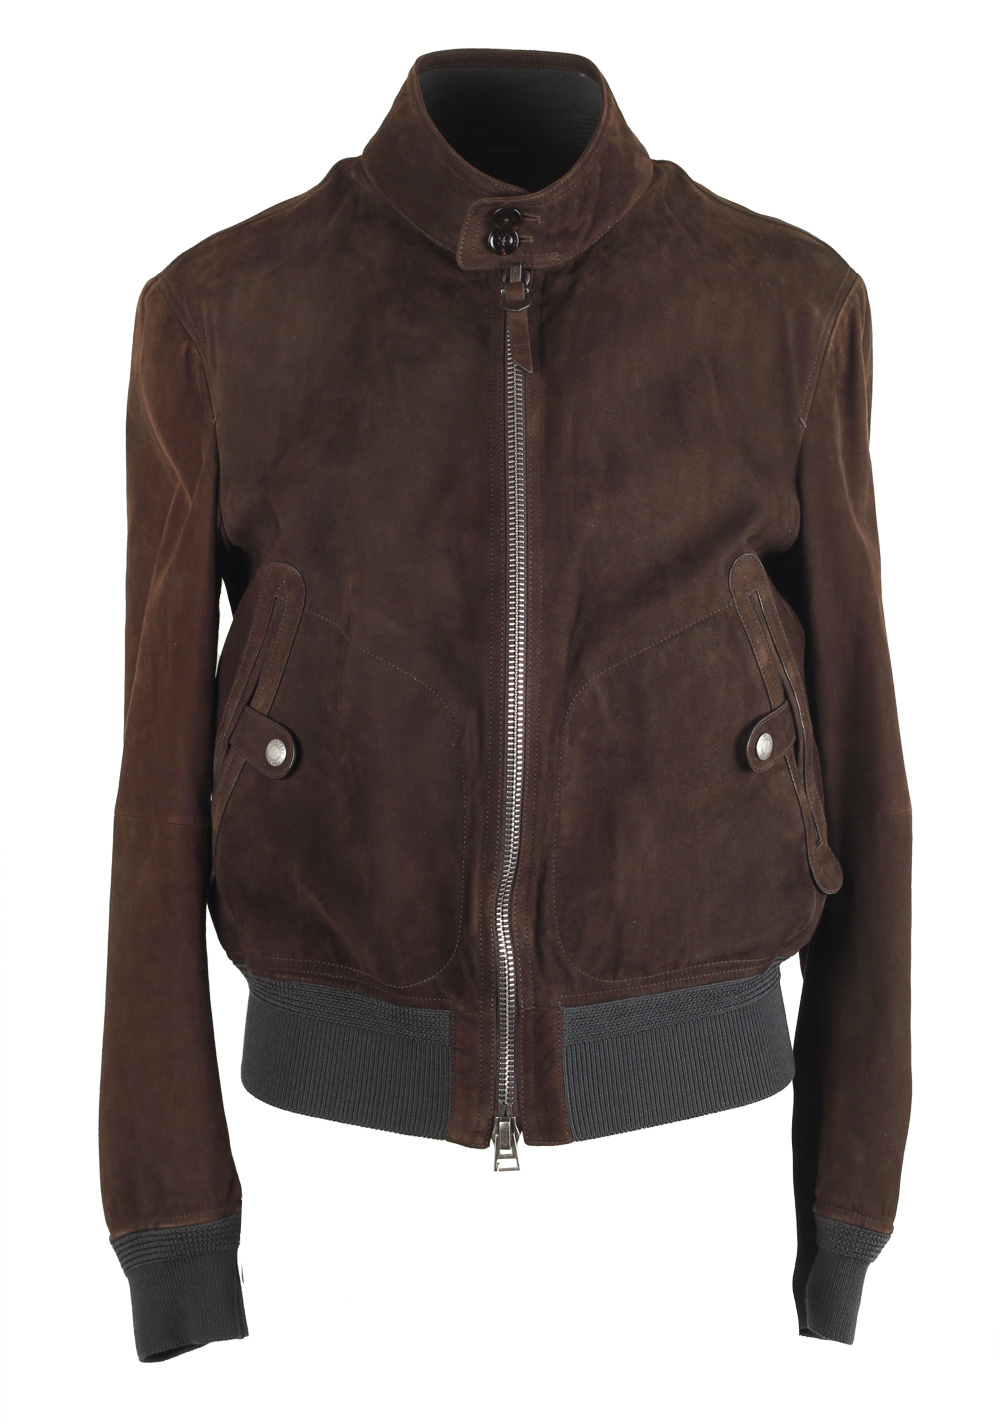 TOM FORD Brown Leather Suede Bomber Jacket Coat Size 48 / 38R U.S. | Costume Limité